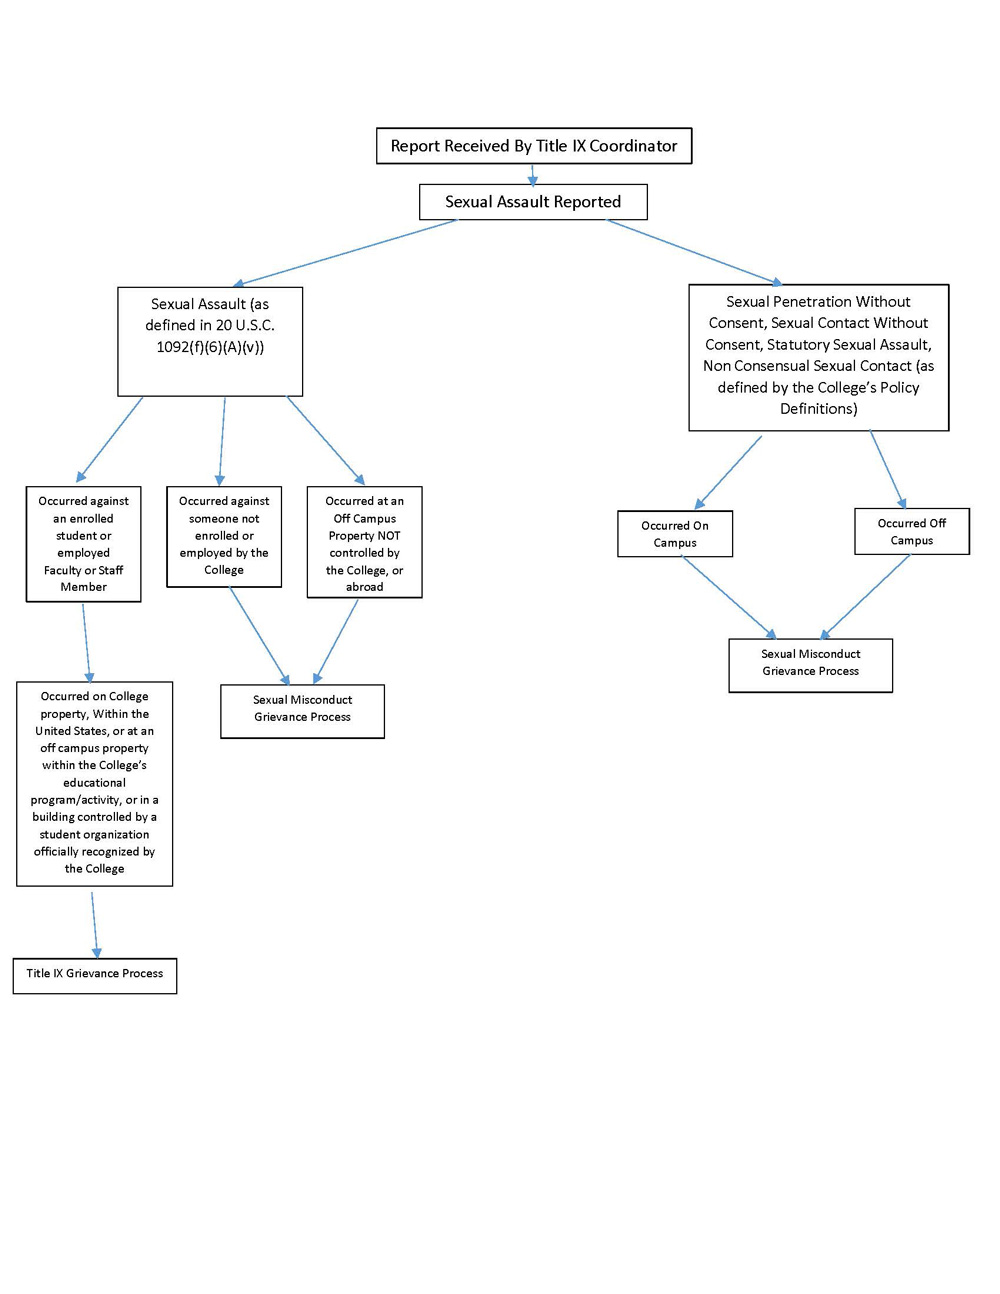 Assessment Flow Chart when sexual assault is reported -see text below for details